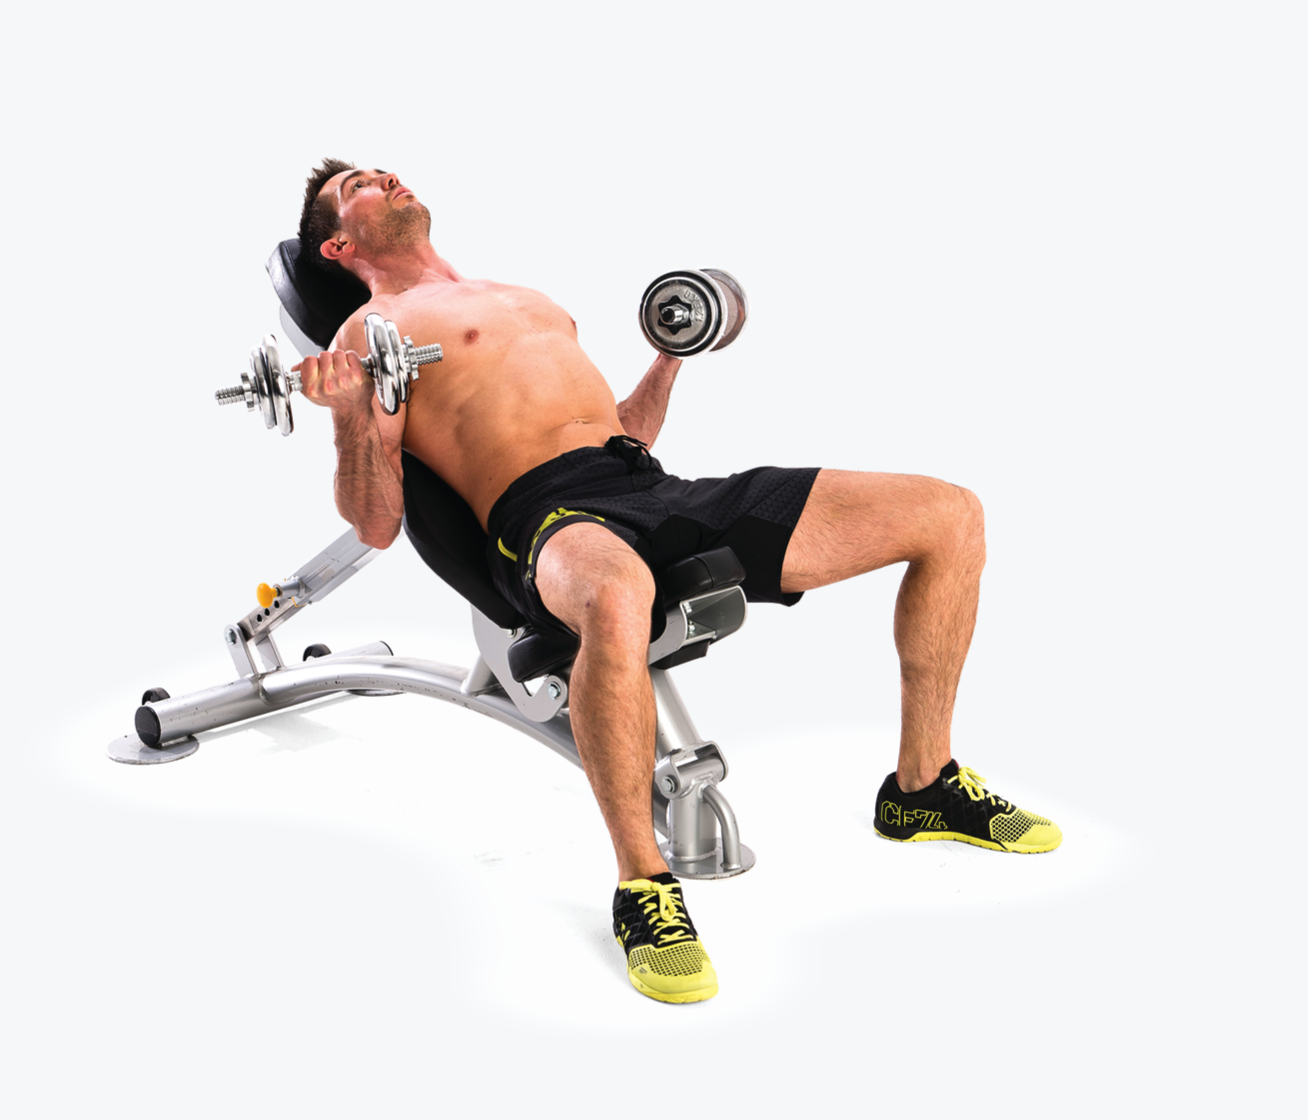 man demonstrated seated curl; sitting on a bench, he lifts and lowers two dumbbells in either hand